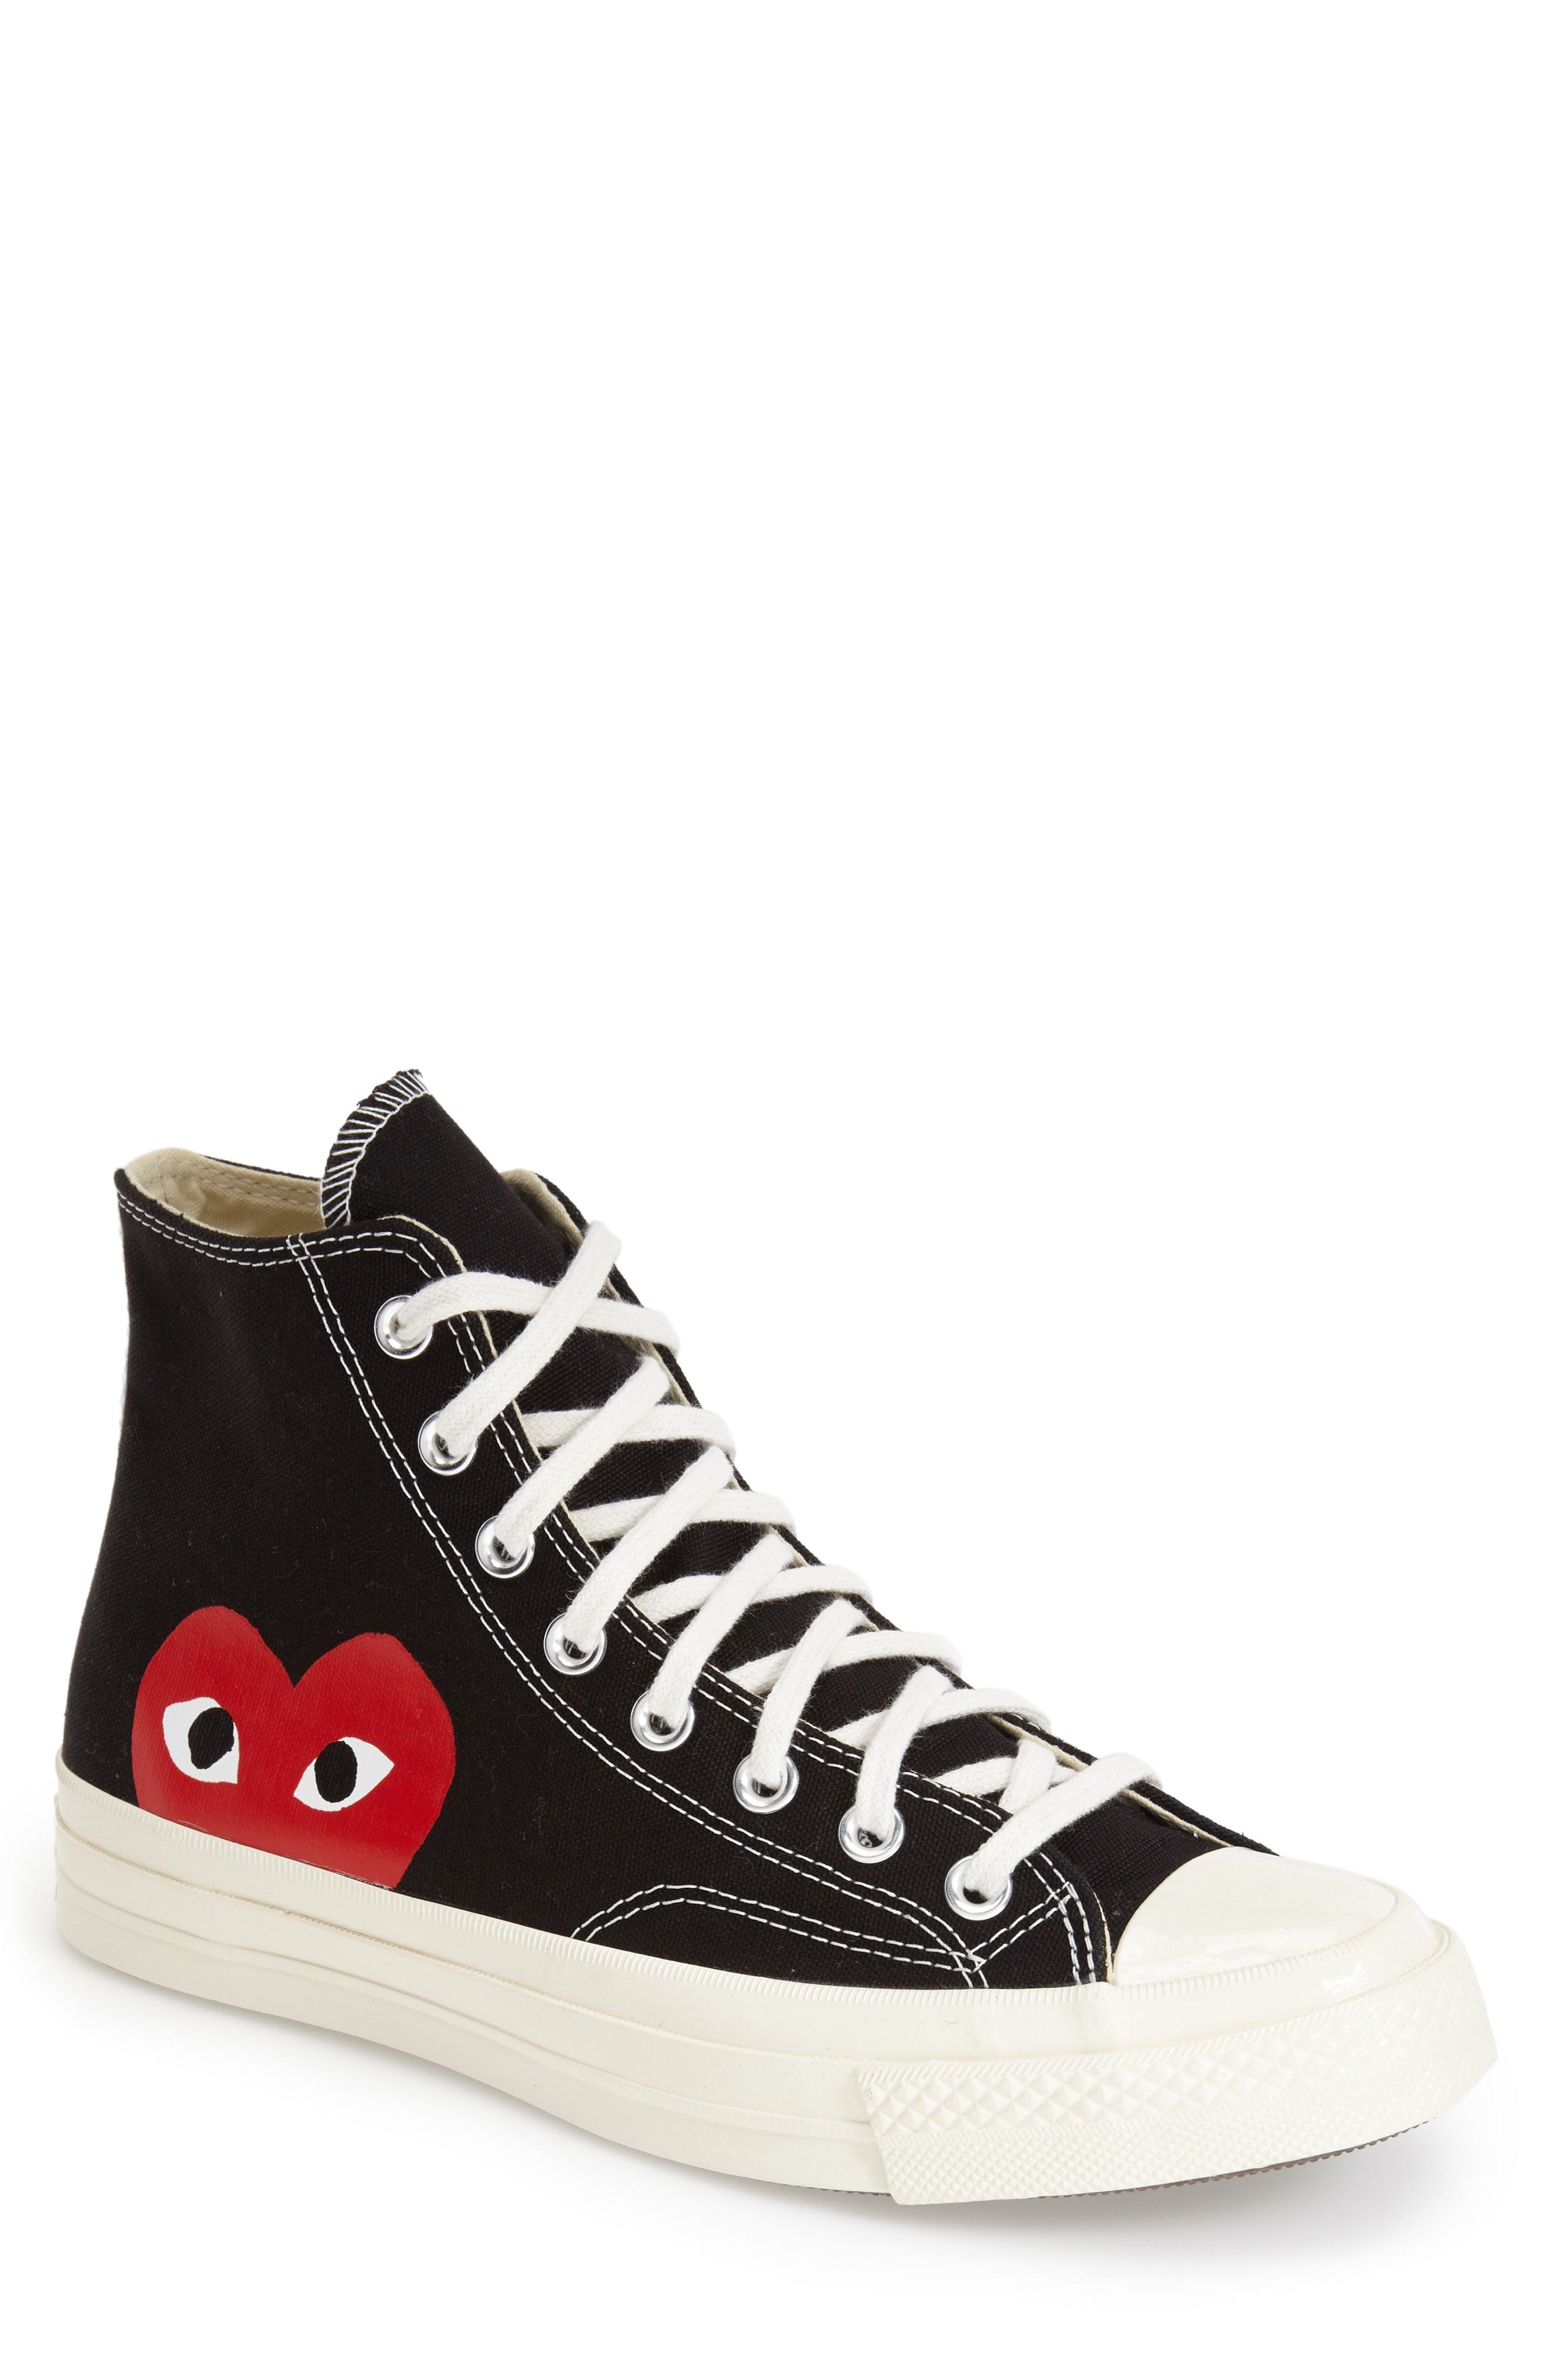 heart shoes converse Off 76% - www 